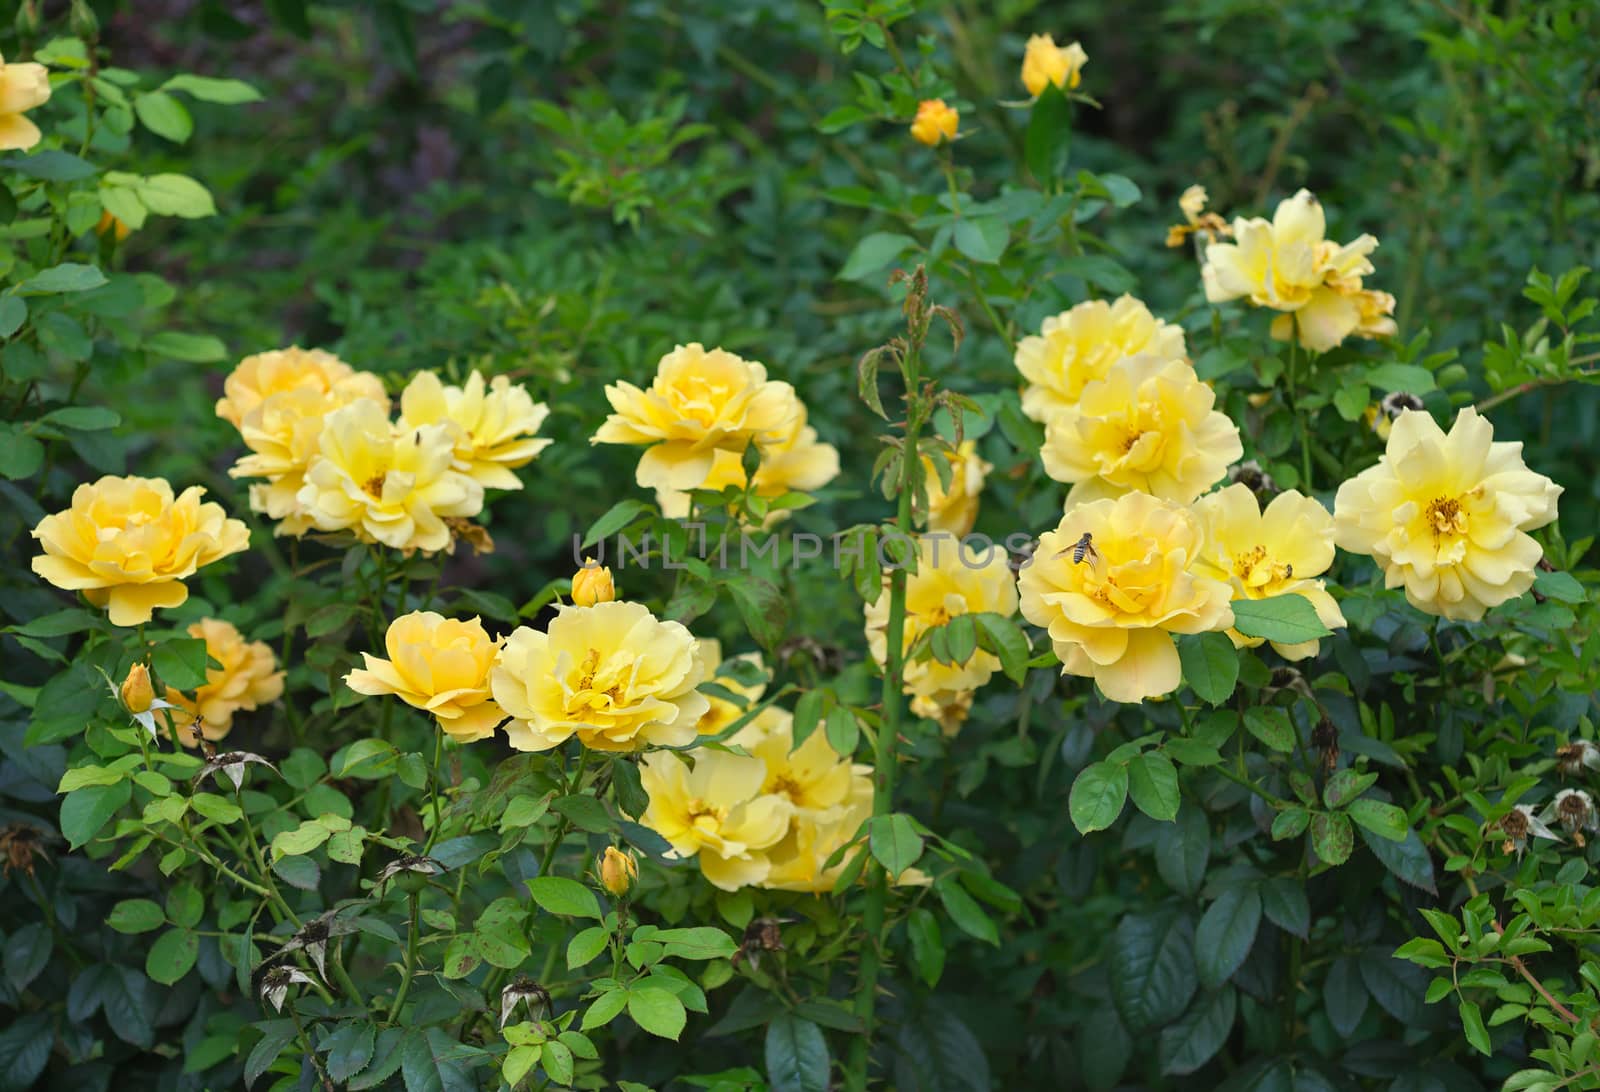 Many yellow roses blossoming in green garden by sheriffkule